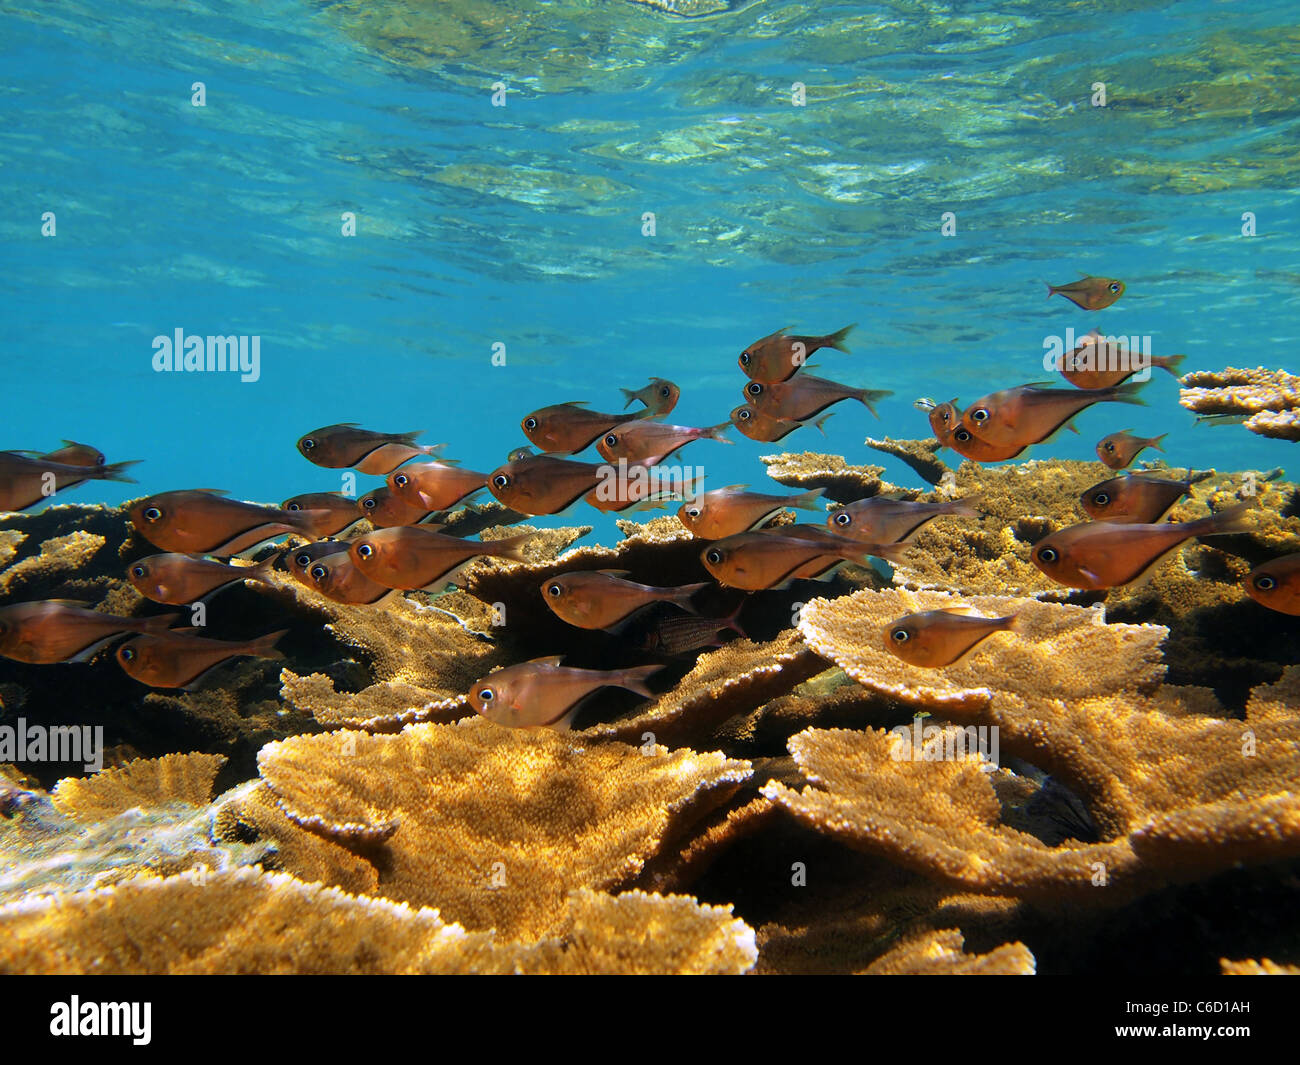 Shoal of glassy sweeper fish, Pempheris schomburgkii, with elkhorn coral, underwater in the Caribbean sea, Bocas del Toro, Panama, Central America Stock Photo